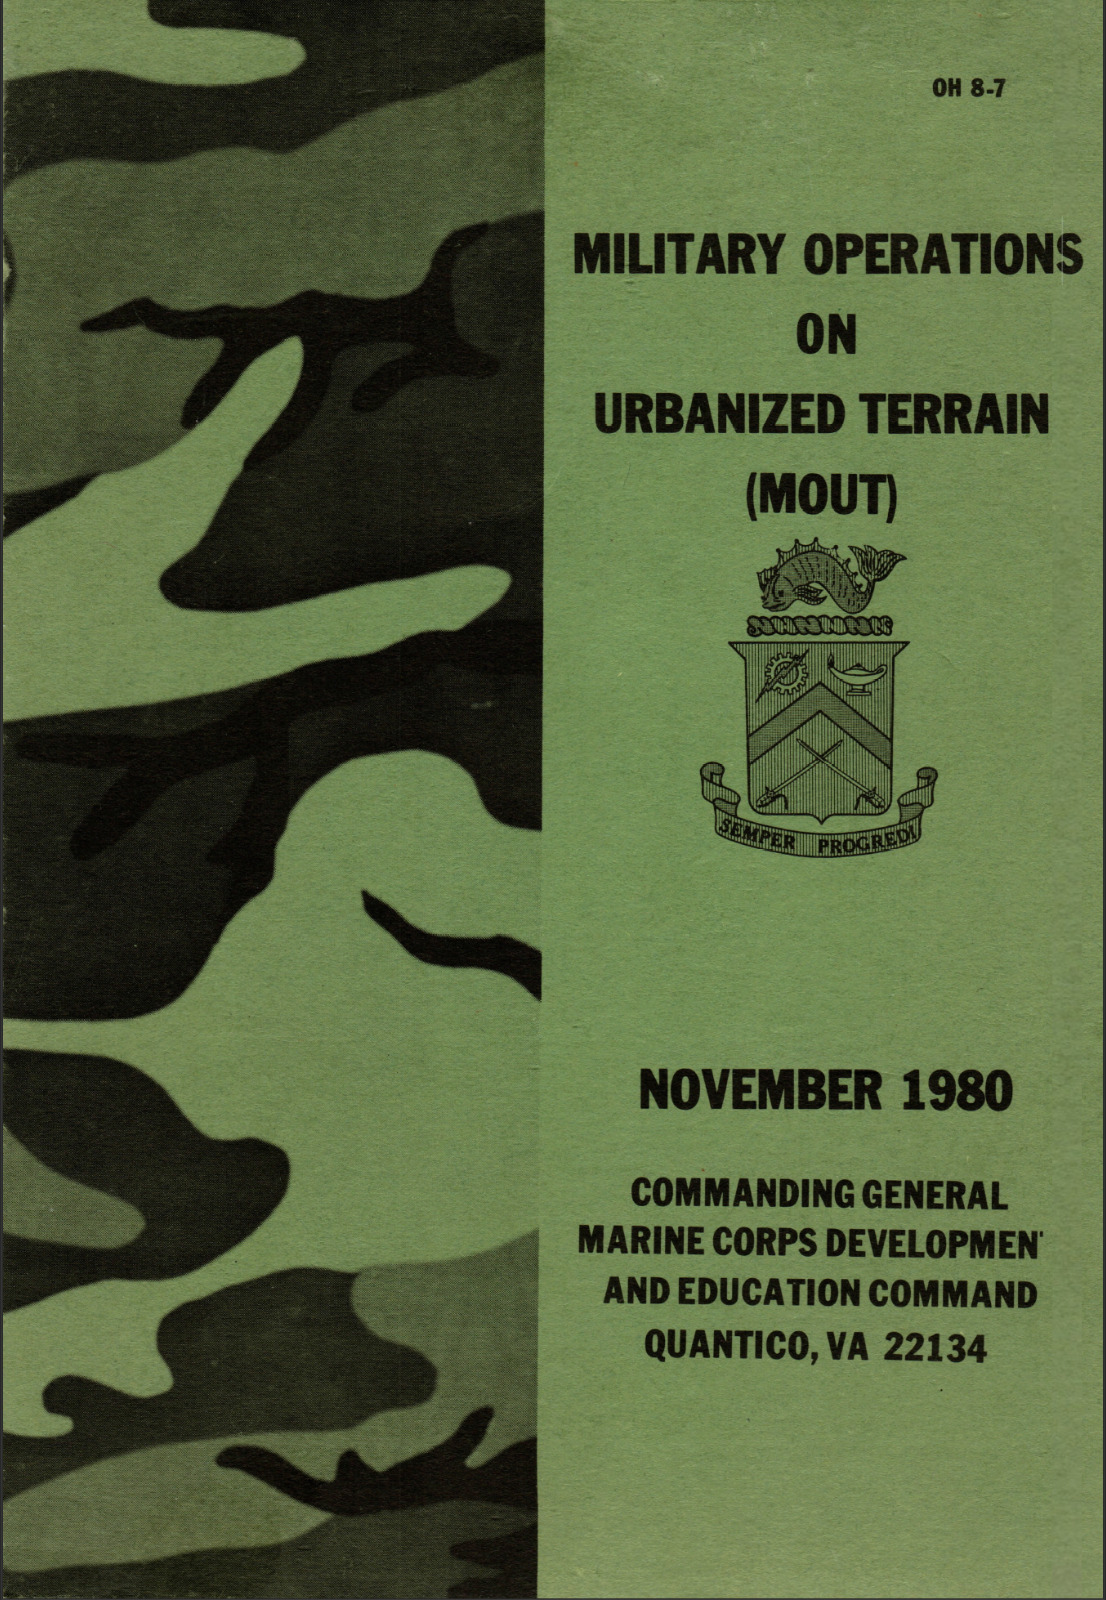 216 Page USMC 1980 OH 8-7 MILITARY OPERATIONS URBANIZED TERRAIN MOUT on Data CD